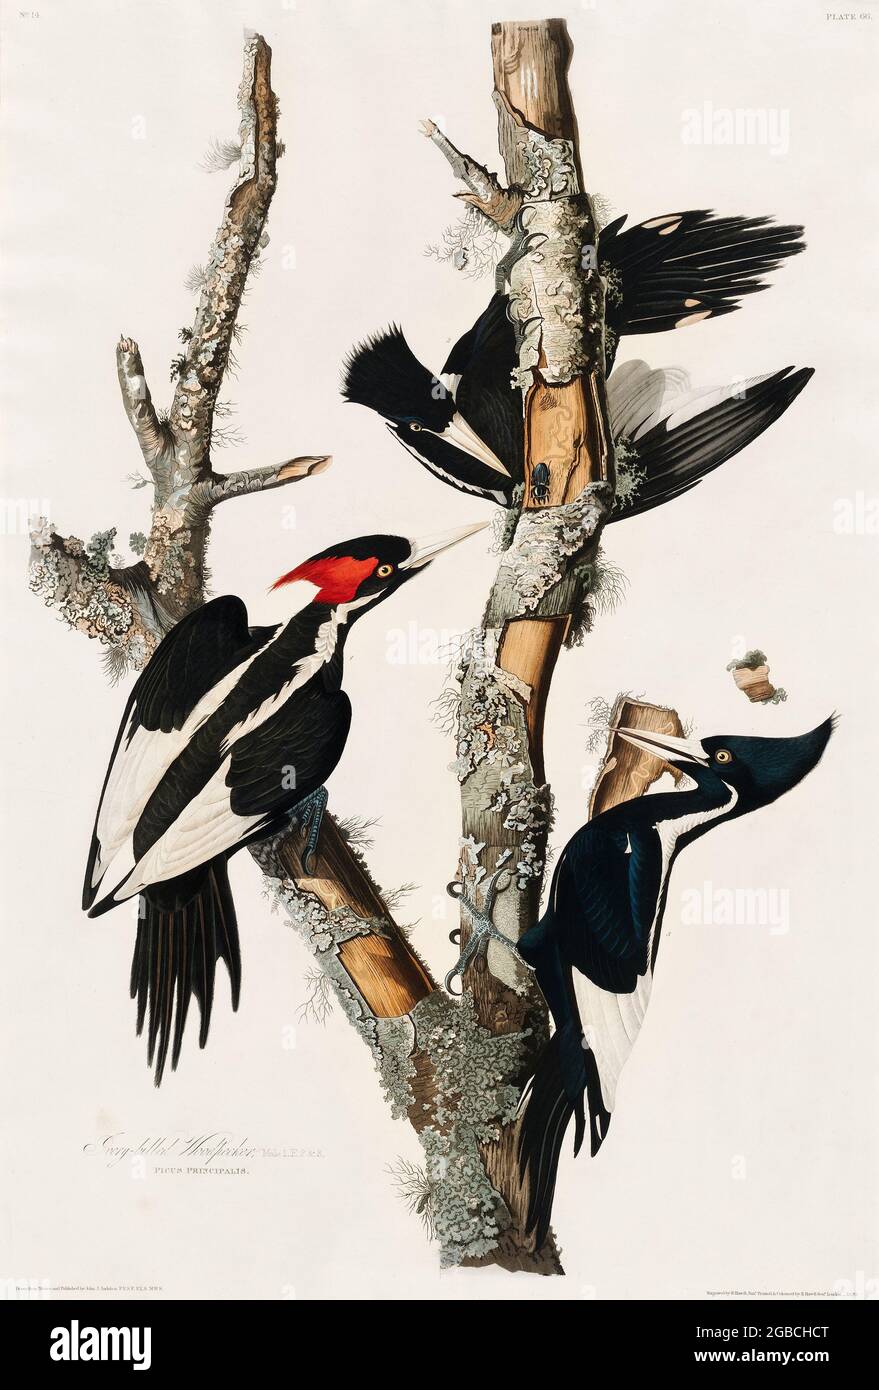 Ivory-billed Woodpecker from Birds of America (1827) by John James Audubon (1785 - 1851), sketched by Robert Havell (1793 - 1878). The original Birds Stock Photo